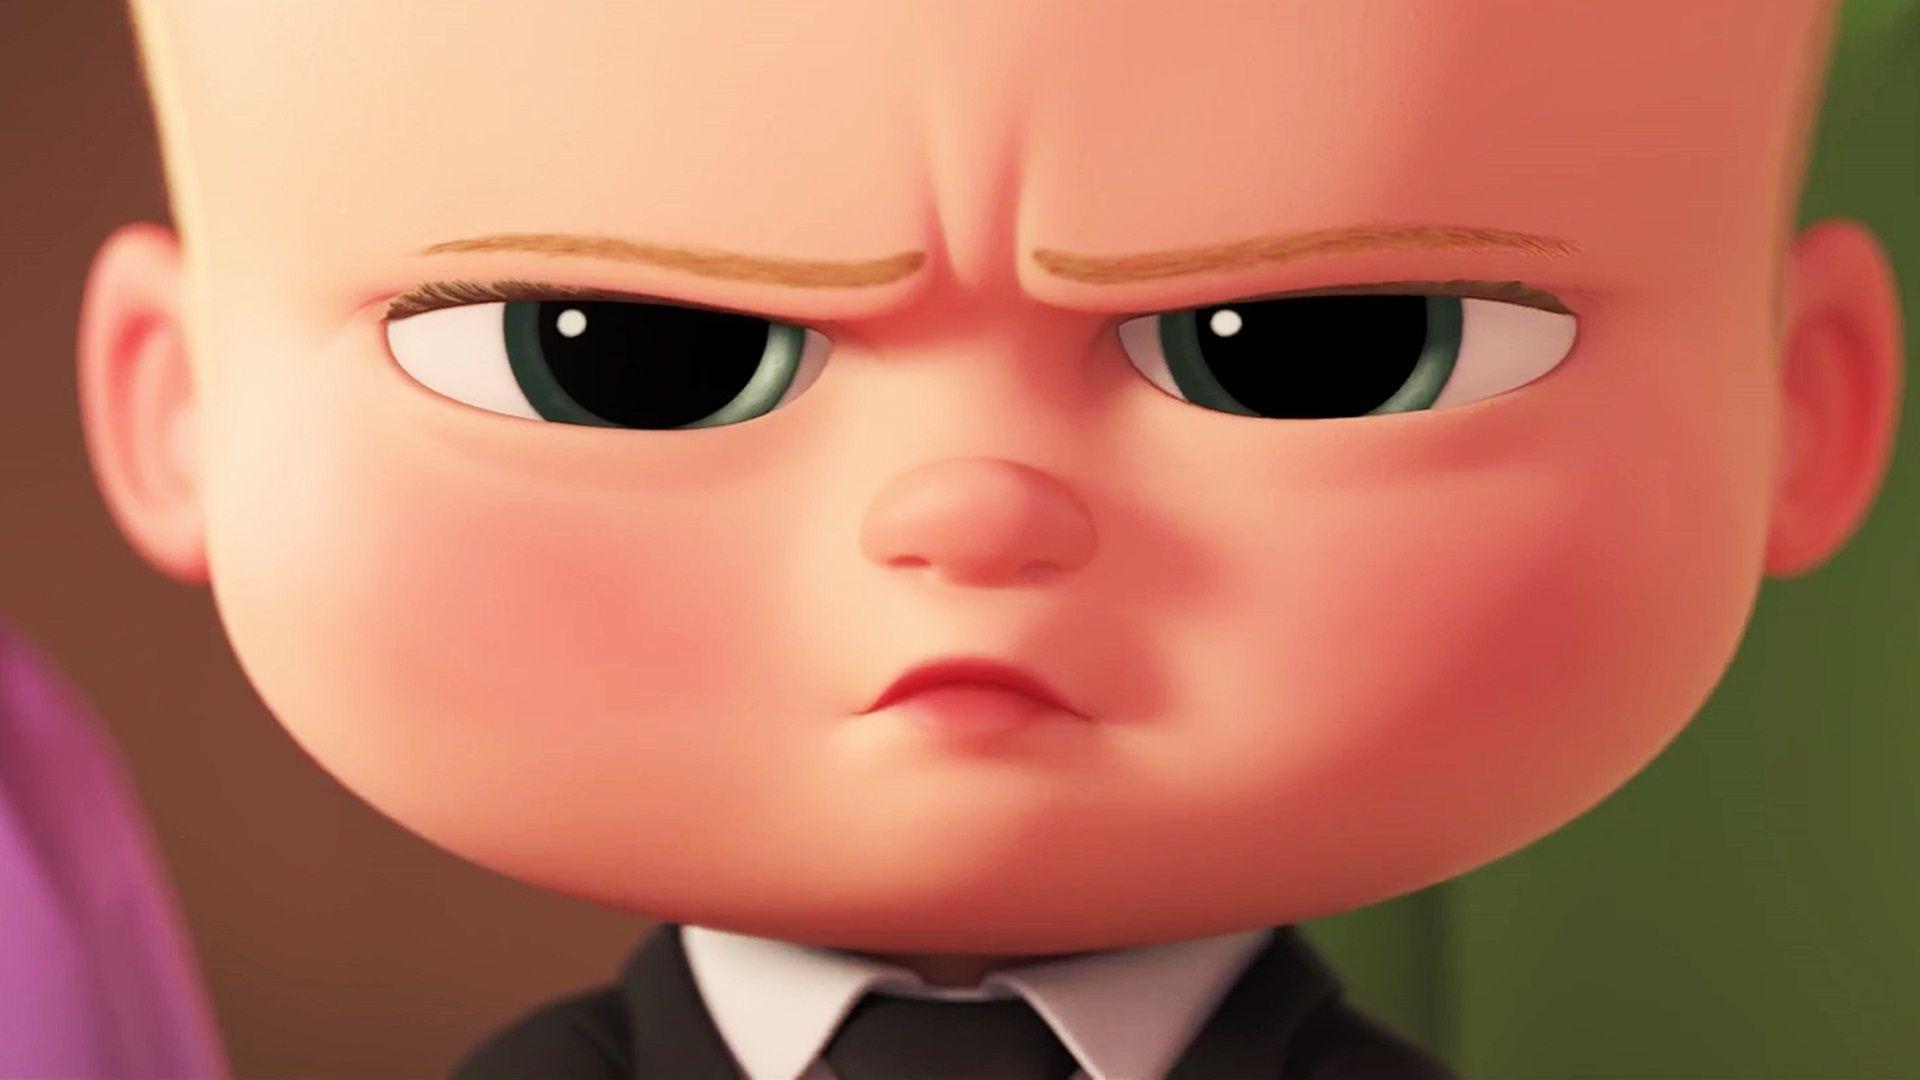 The Boss Baby Wallpaper HD Background, Image, Pics, Photo Free